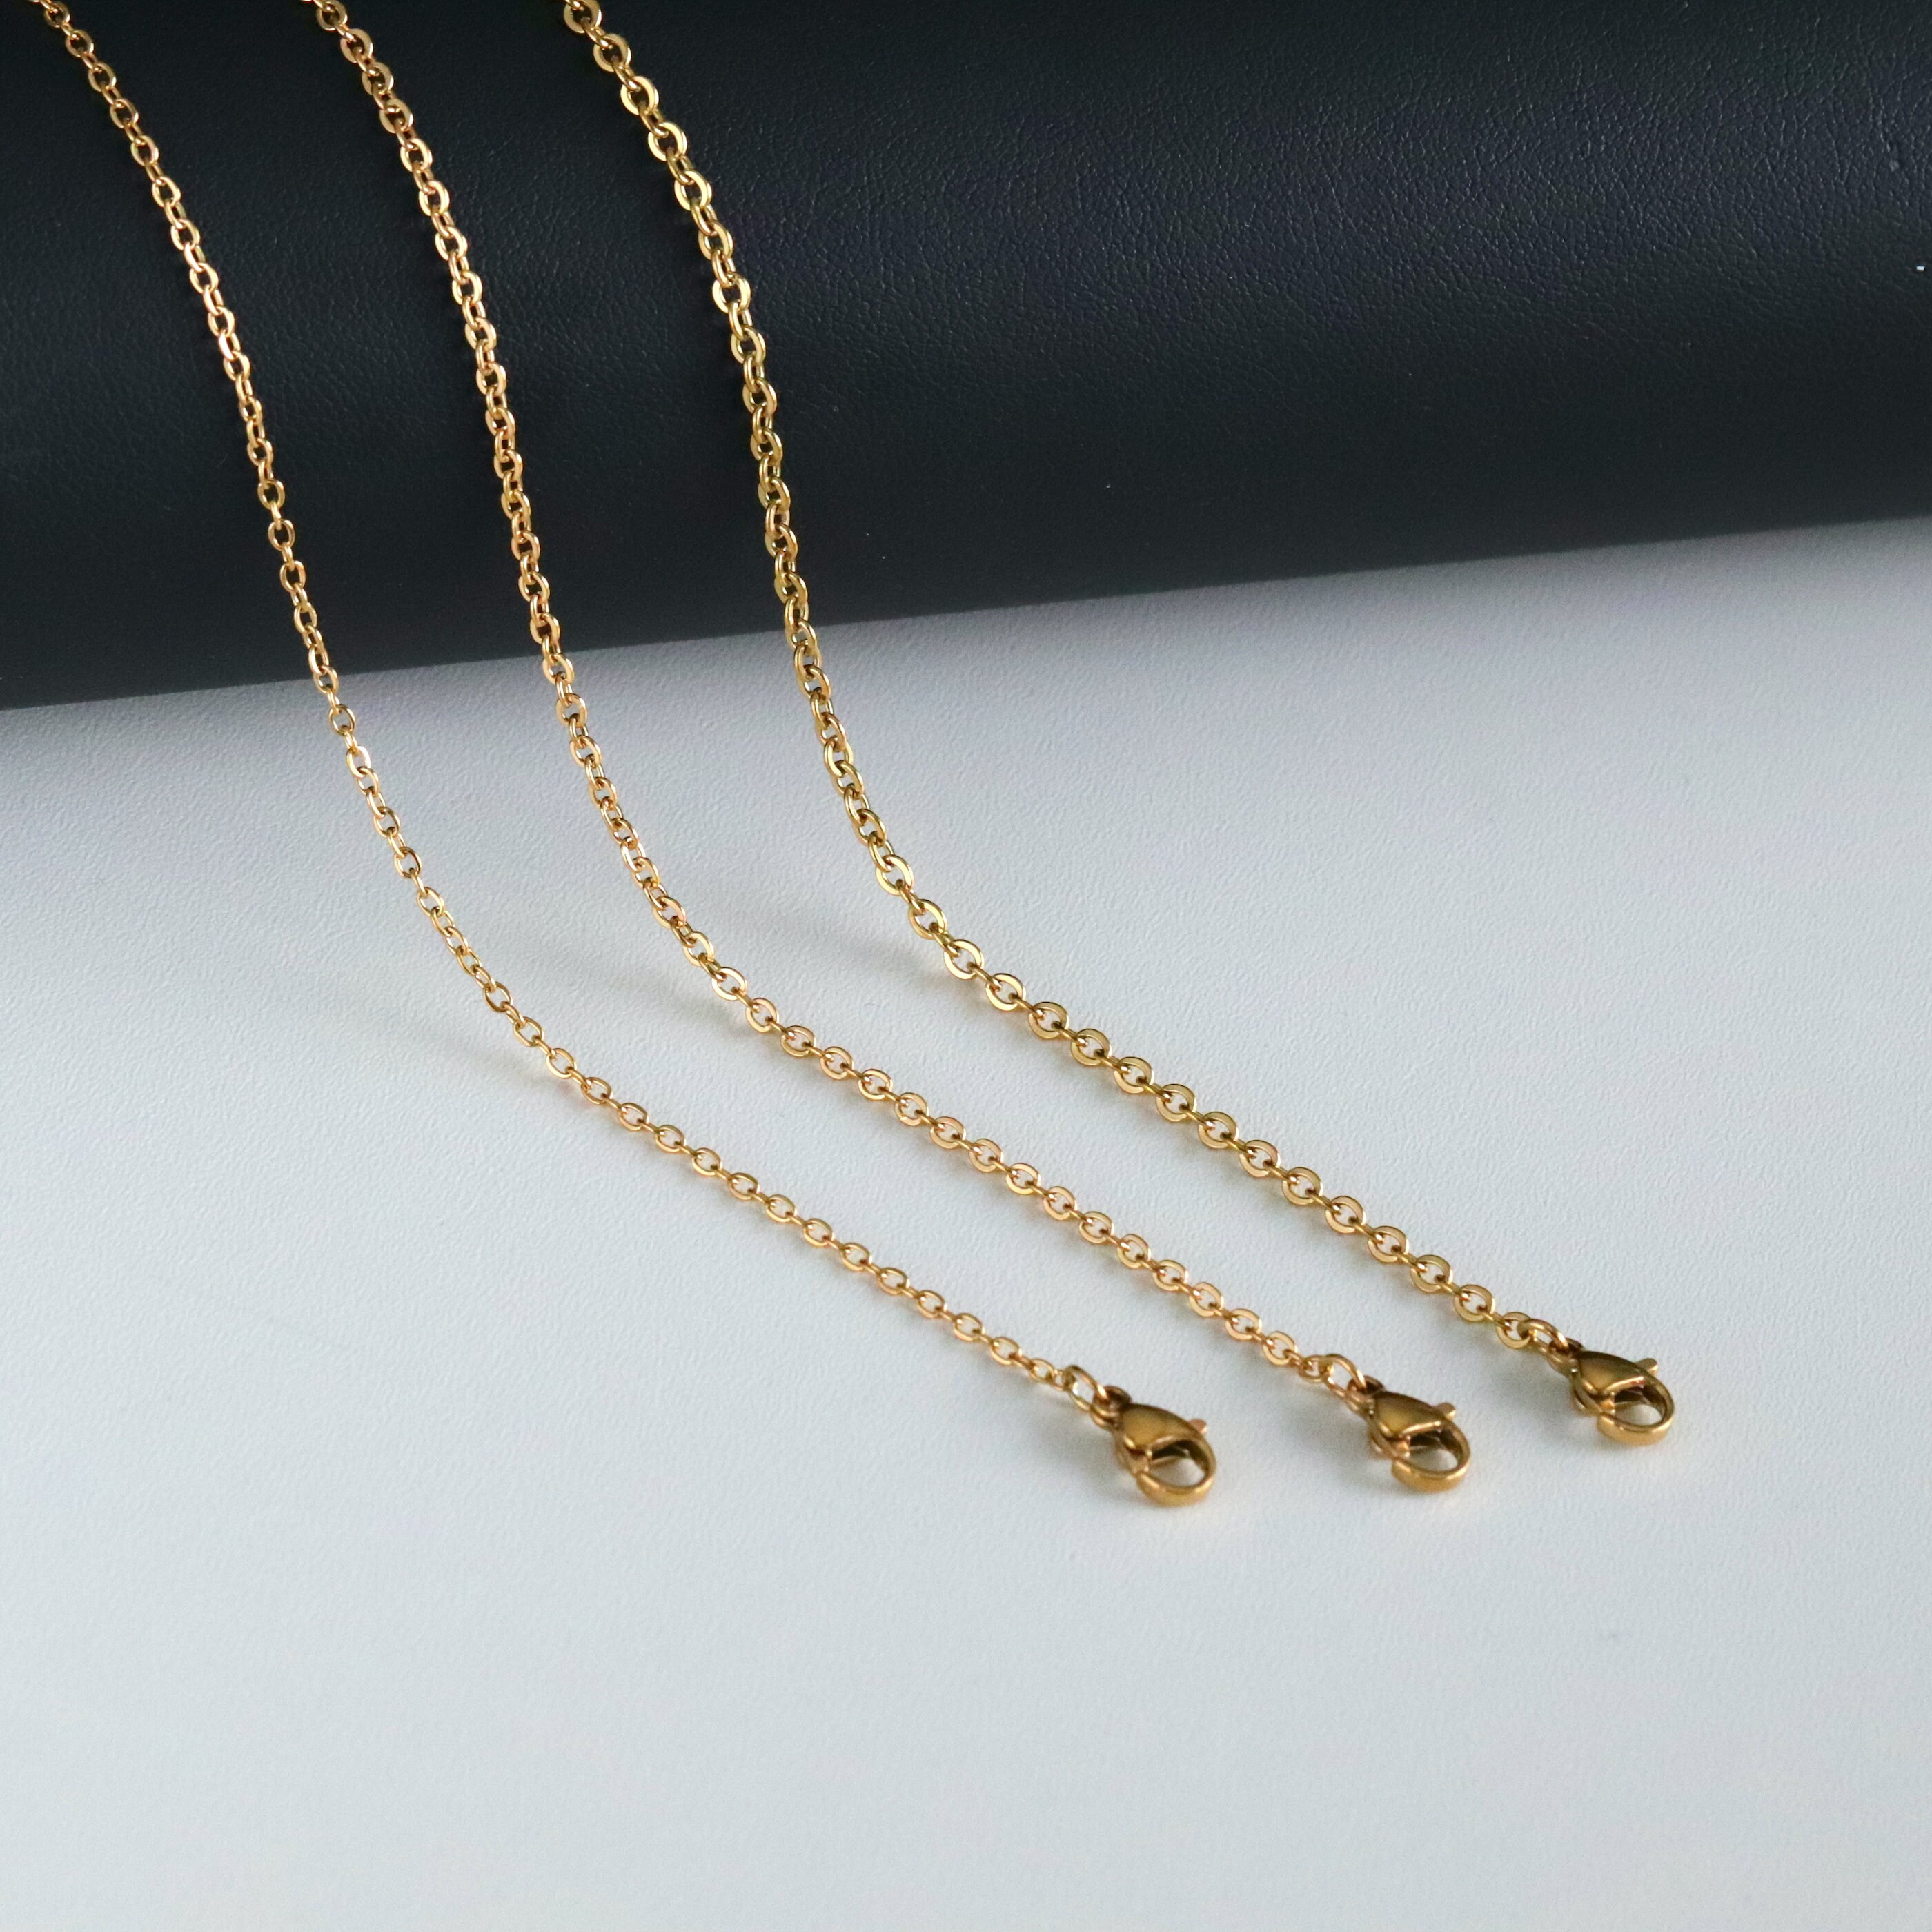 5pcs 45+5cm plated Gold Stainless Steel Link Chains Oval Bulk Necklaces  Jewelry Adjustable Chains Wholesale Chokers DIY Crafts